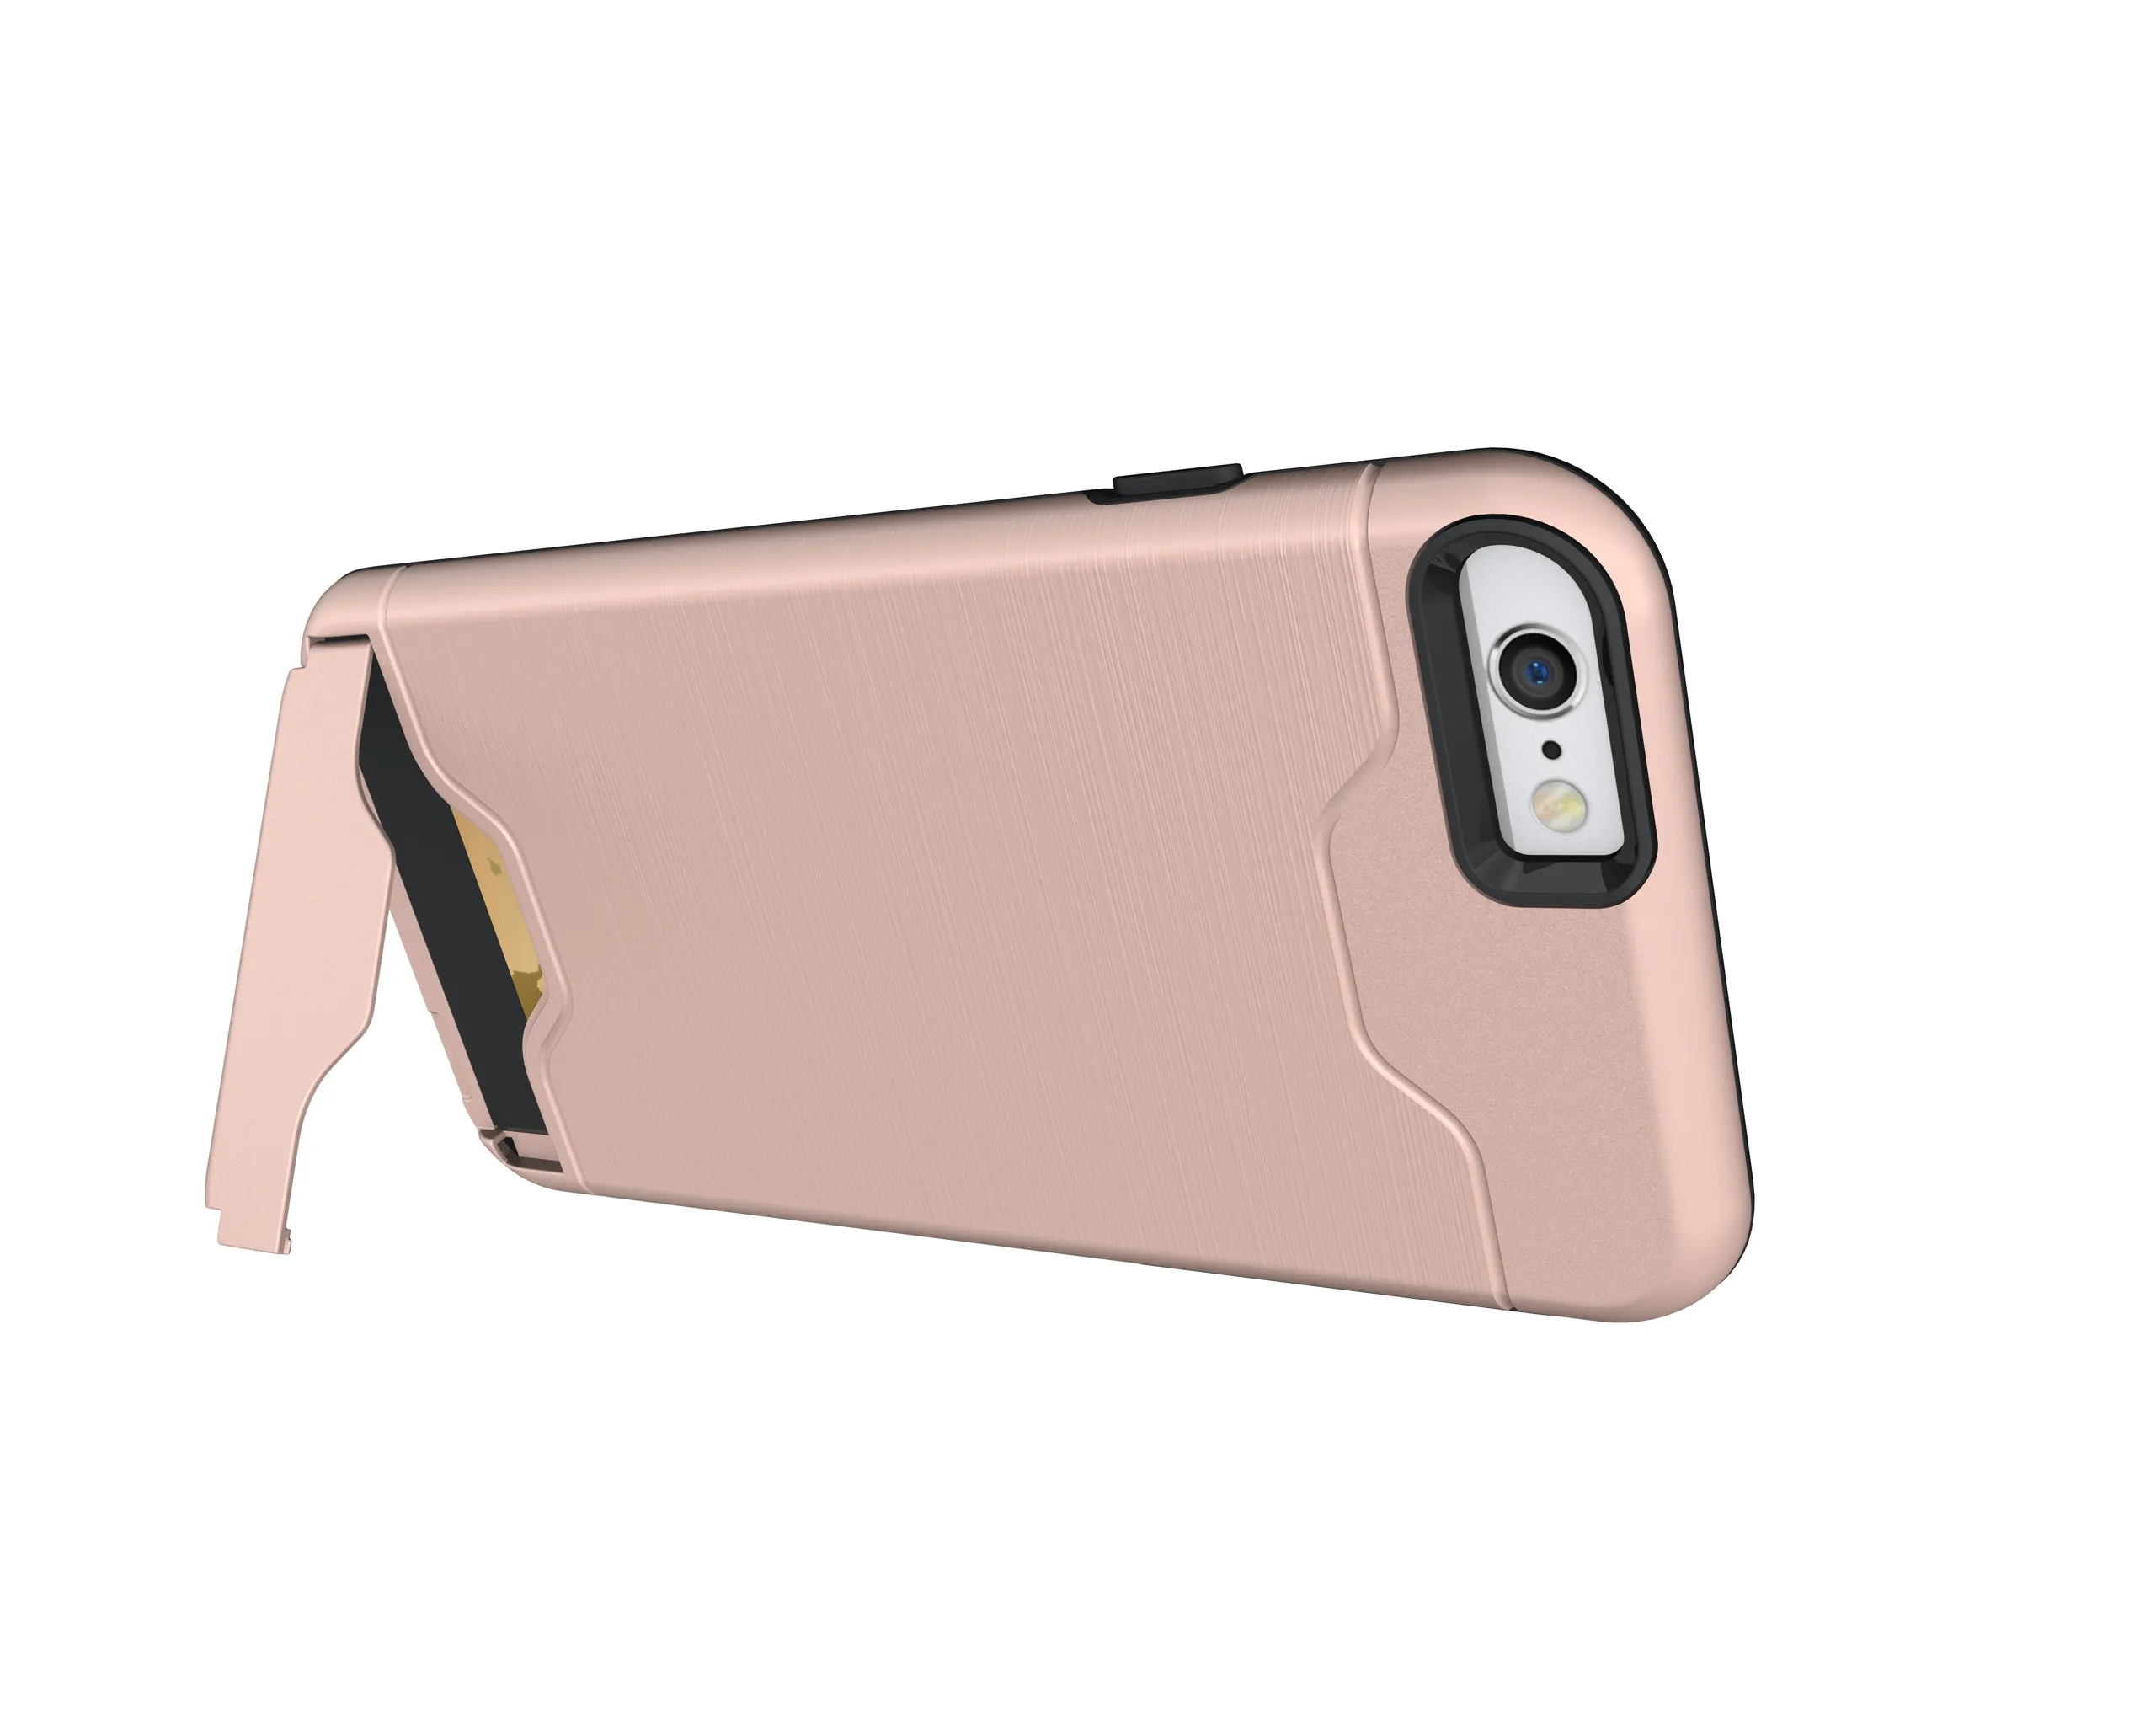 Hybrid Armor Brushed Holder Credit Card Pocket Cover Case Kickstand For iphone 11 PRO 11 PRO MAX 6 7 8 PLUS XR XS XS MAX 